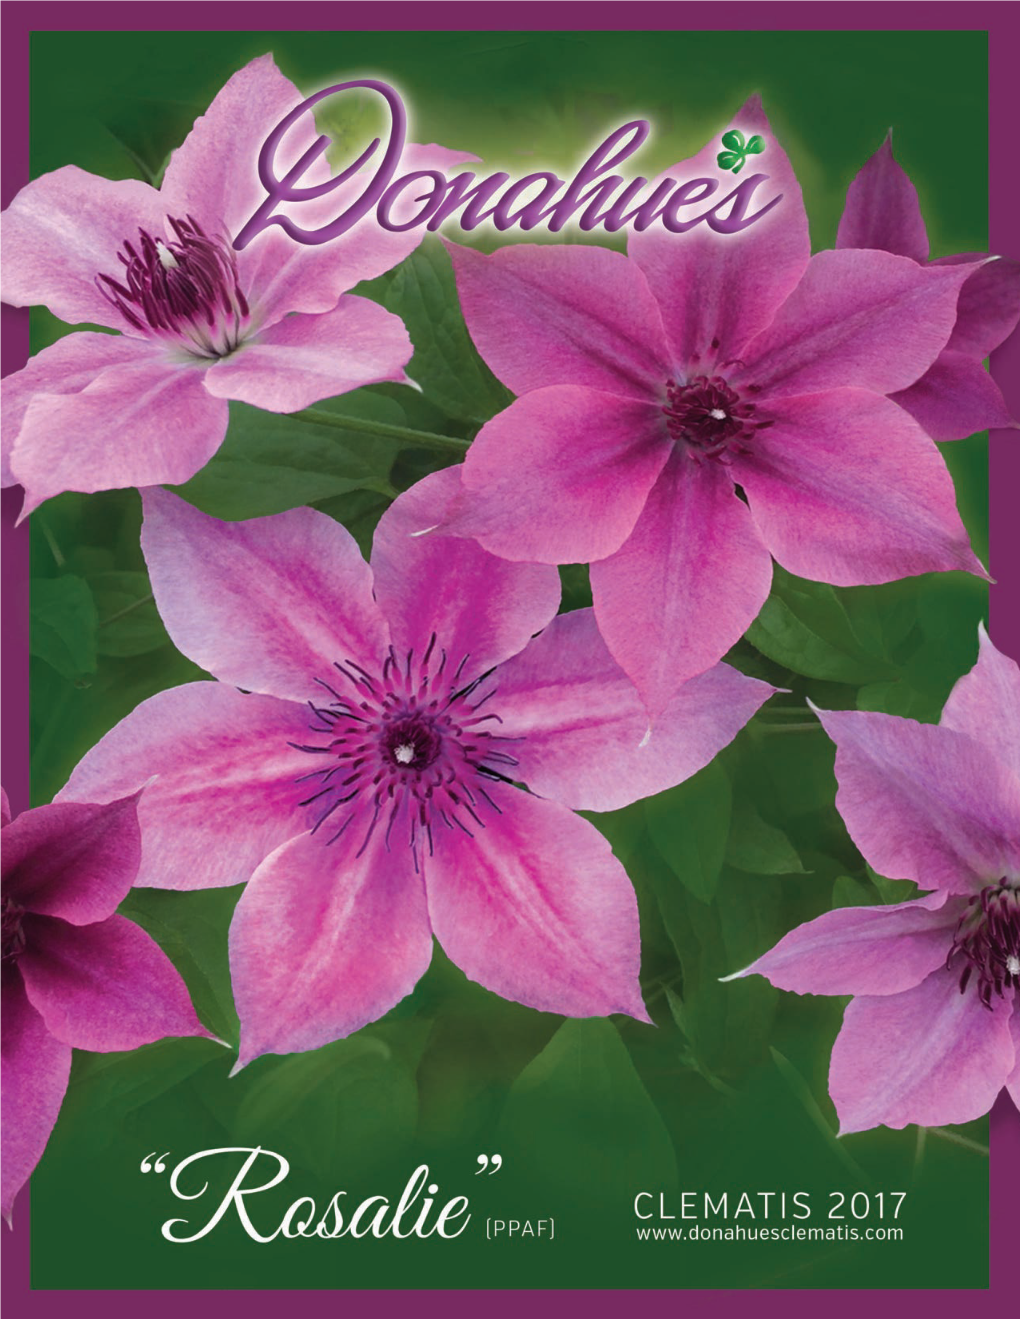 THE DONAHUE COLLECTION” “LARGE and SMALL We’Ve Put Together a Collection of Six Clematis Varieties That Are Outstanding in Pot Production and in the Garden